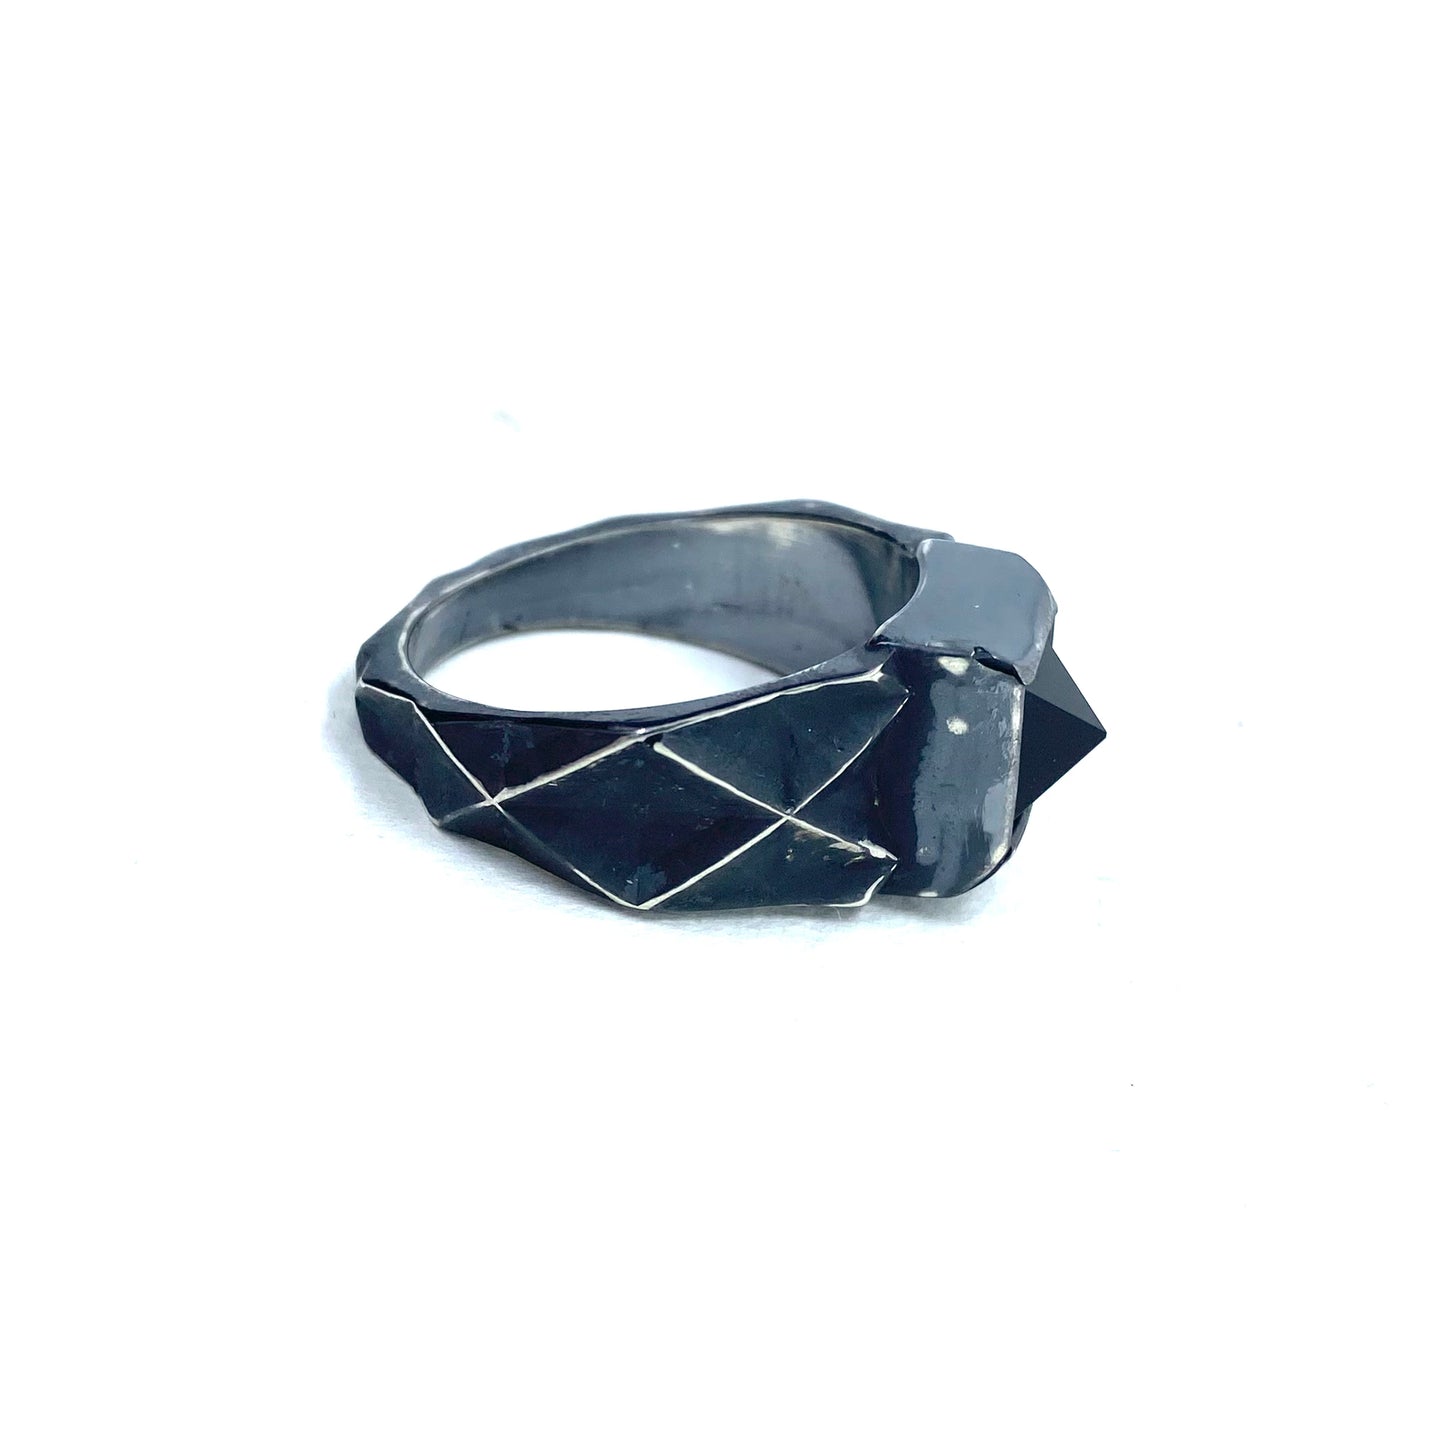 Brutalist Ring with Black Onyx Pyramid in Sterling Silver